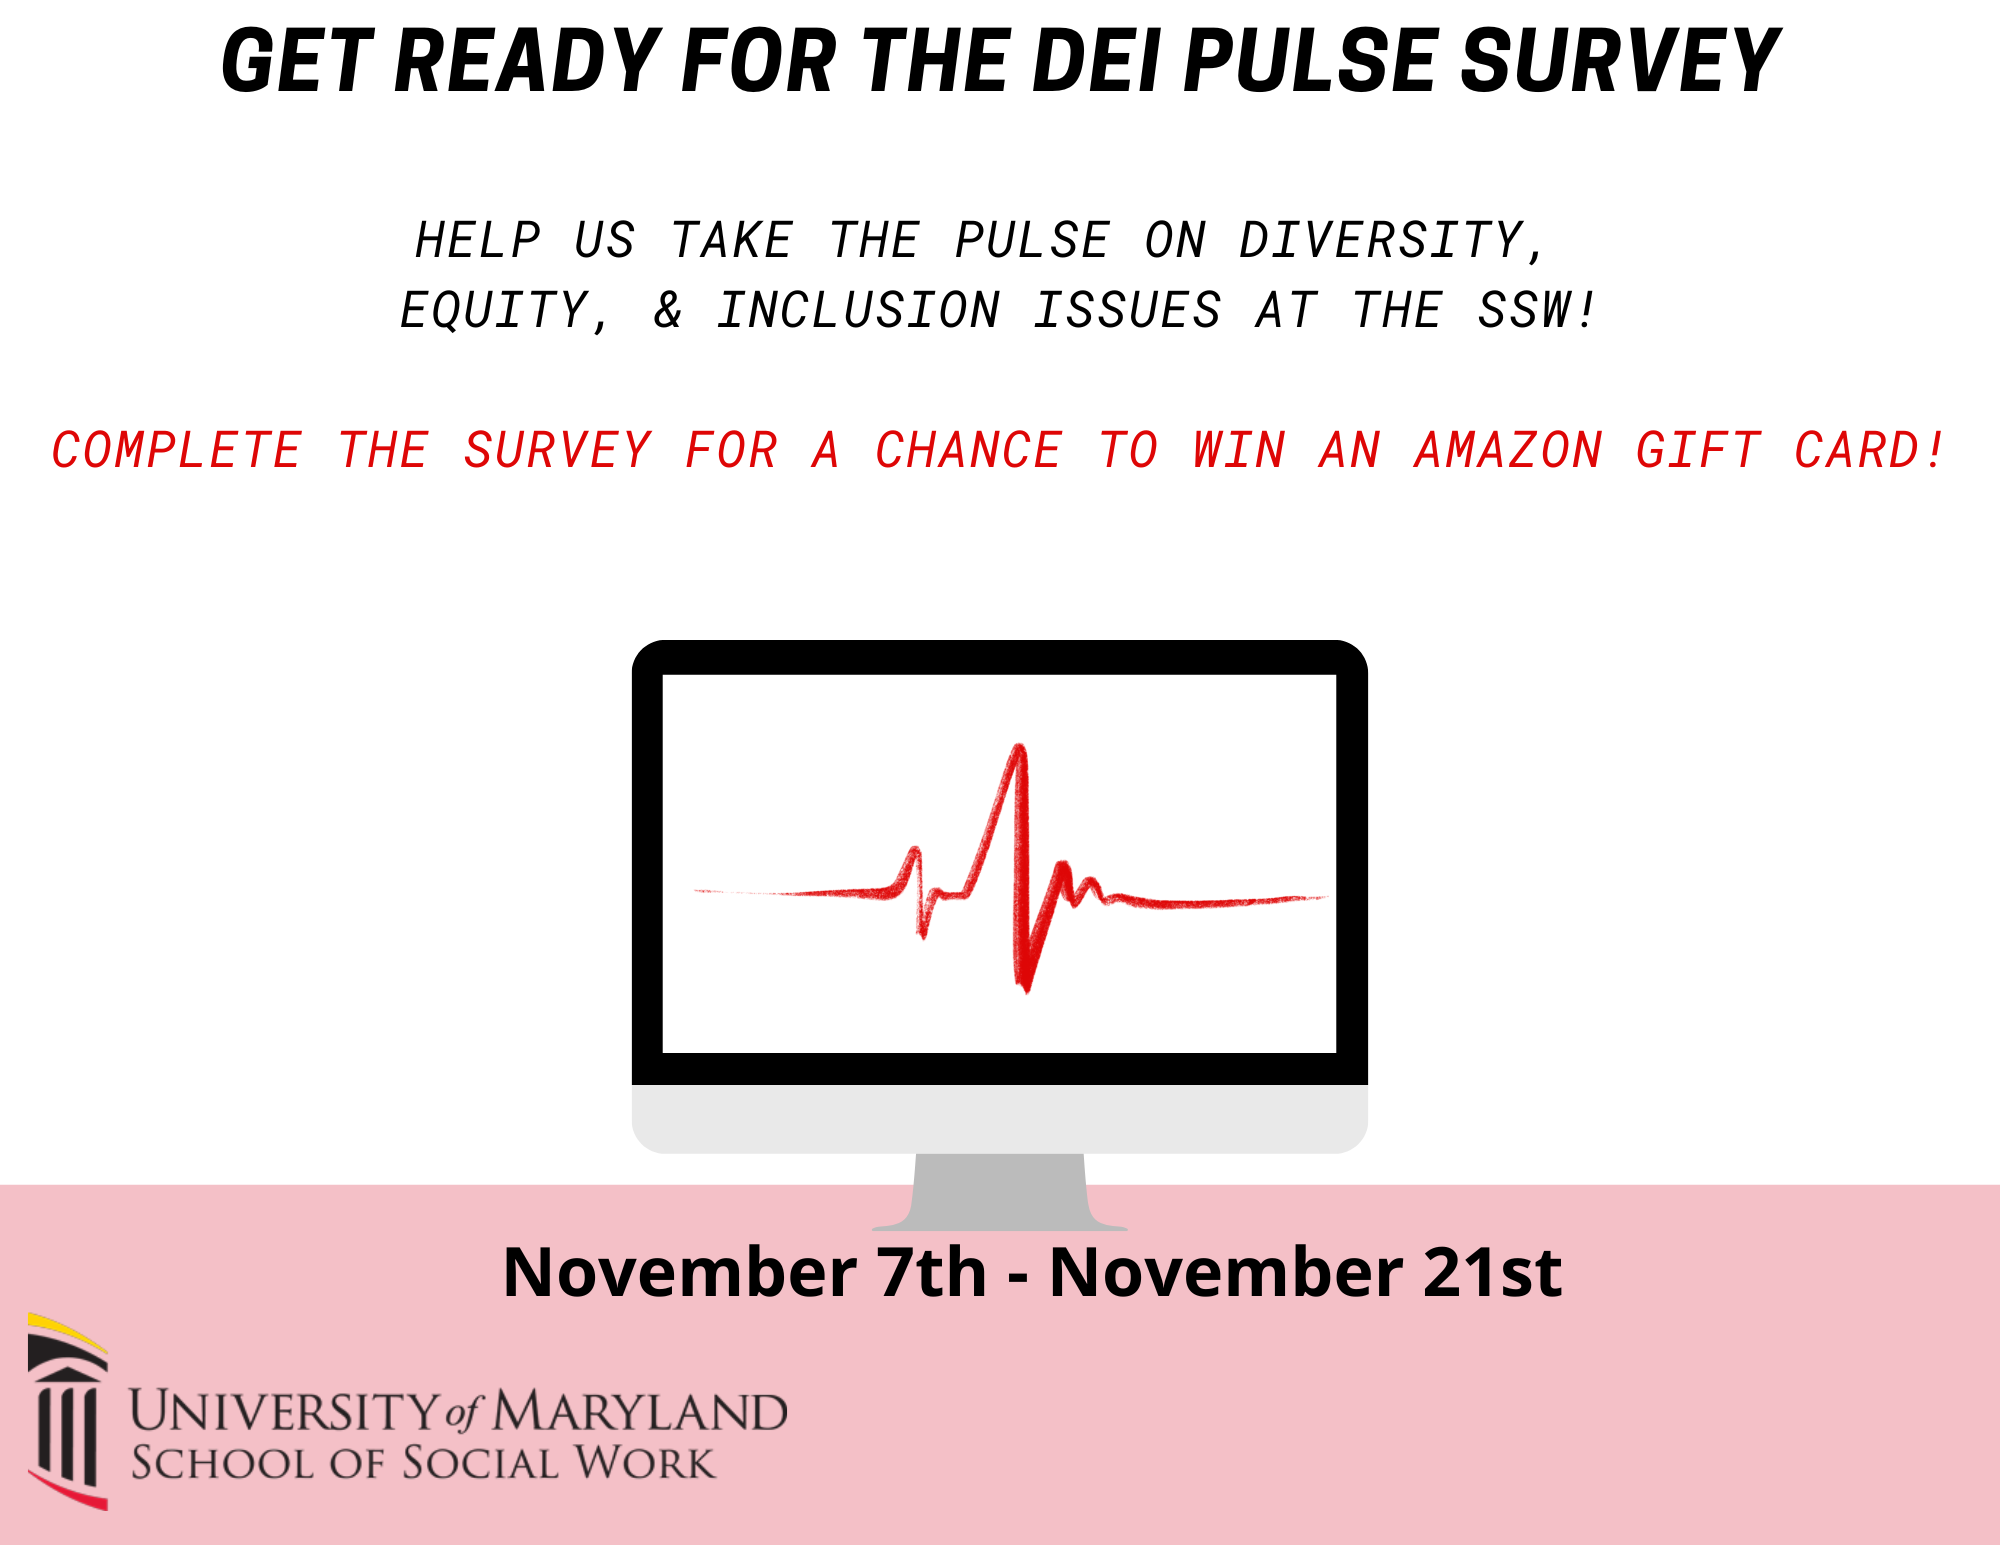 Get Ready for the DEI Pulse Survey that Helps us take the pulse on Diversity, Equity, & Inclusion issues at the SSW! November 7th - November 21st